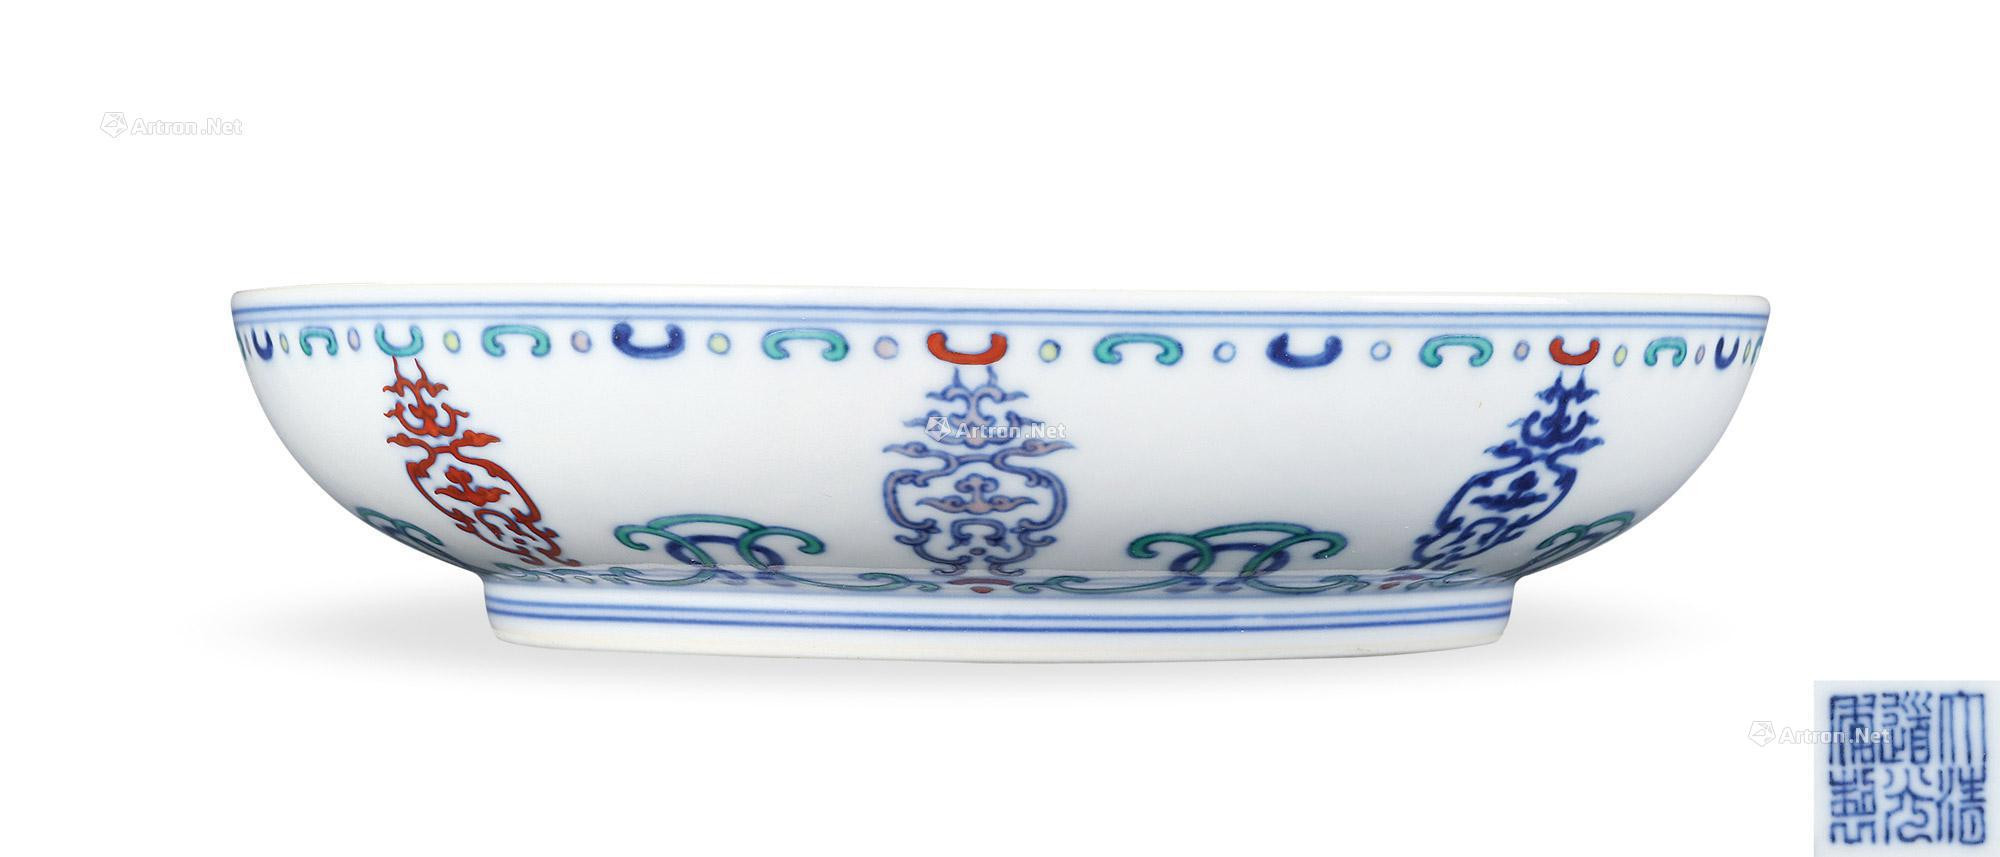 A CONTENDING COLORS PLATE WITH LONGEVITY DESIGN